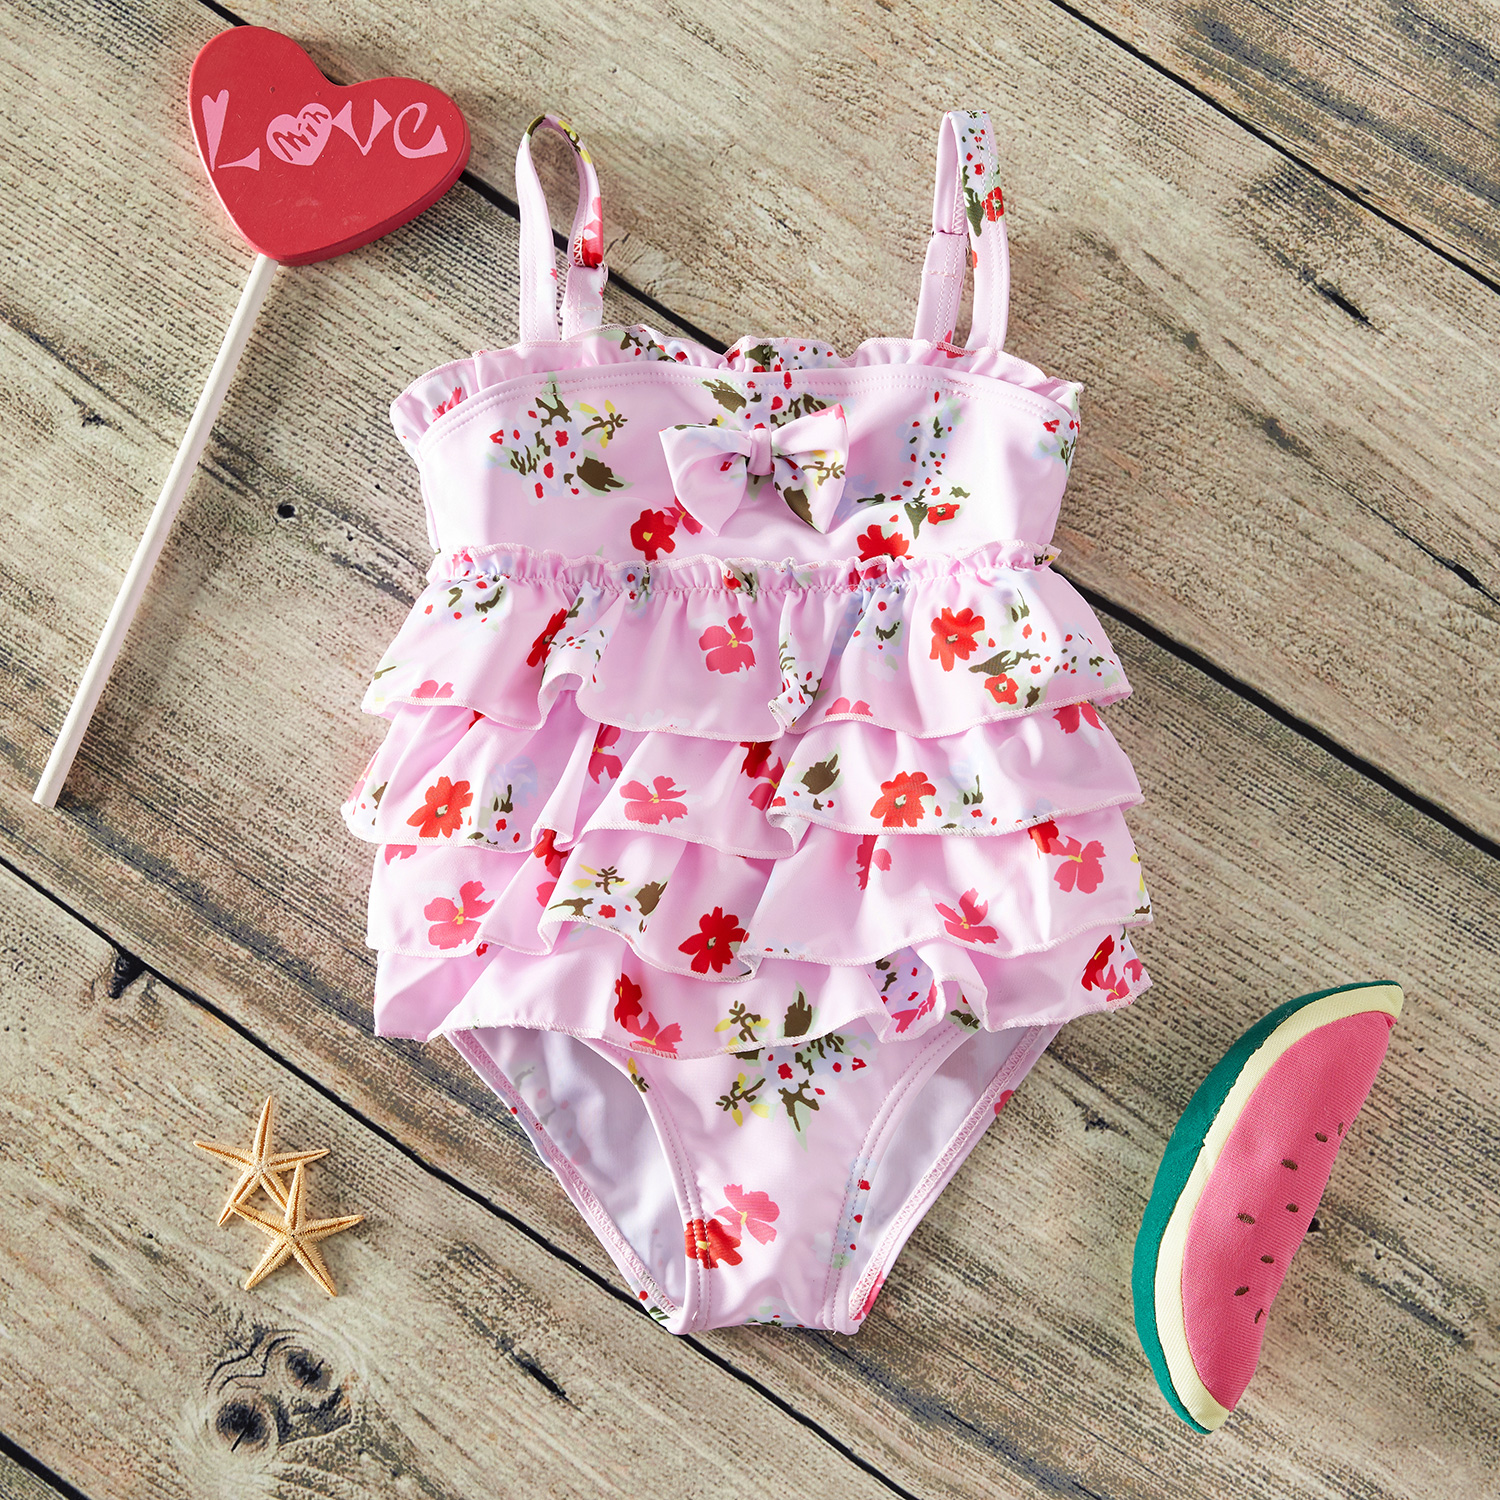 Baby / Toddler Girl Pretty Floral Print Layered Swimsuit